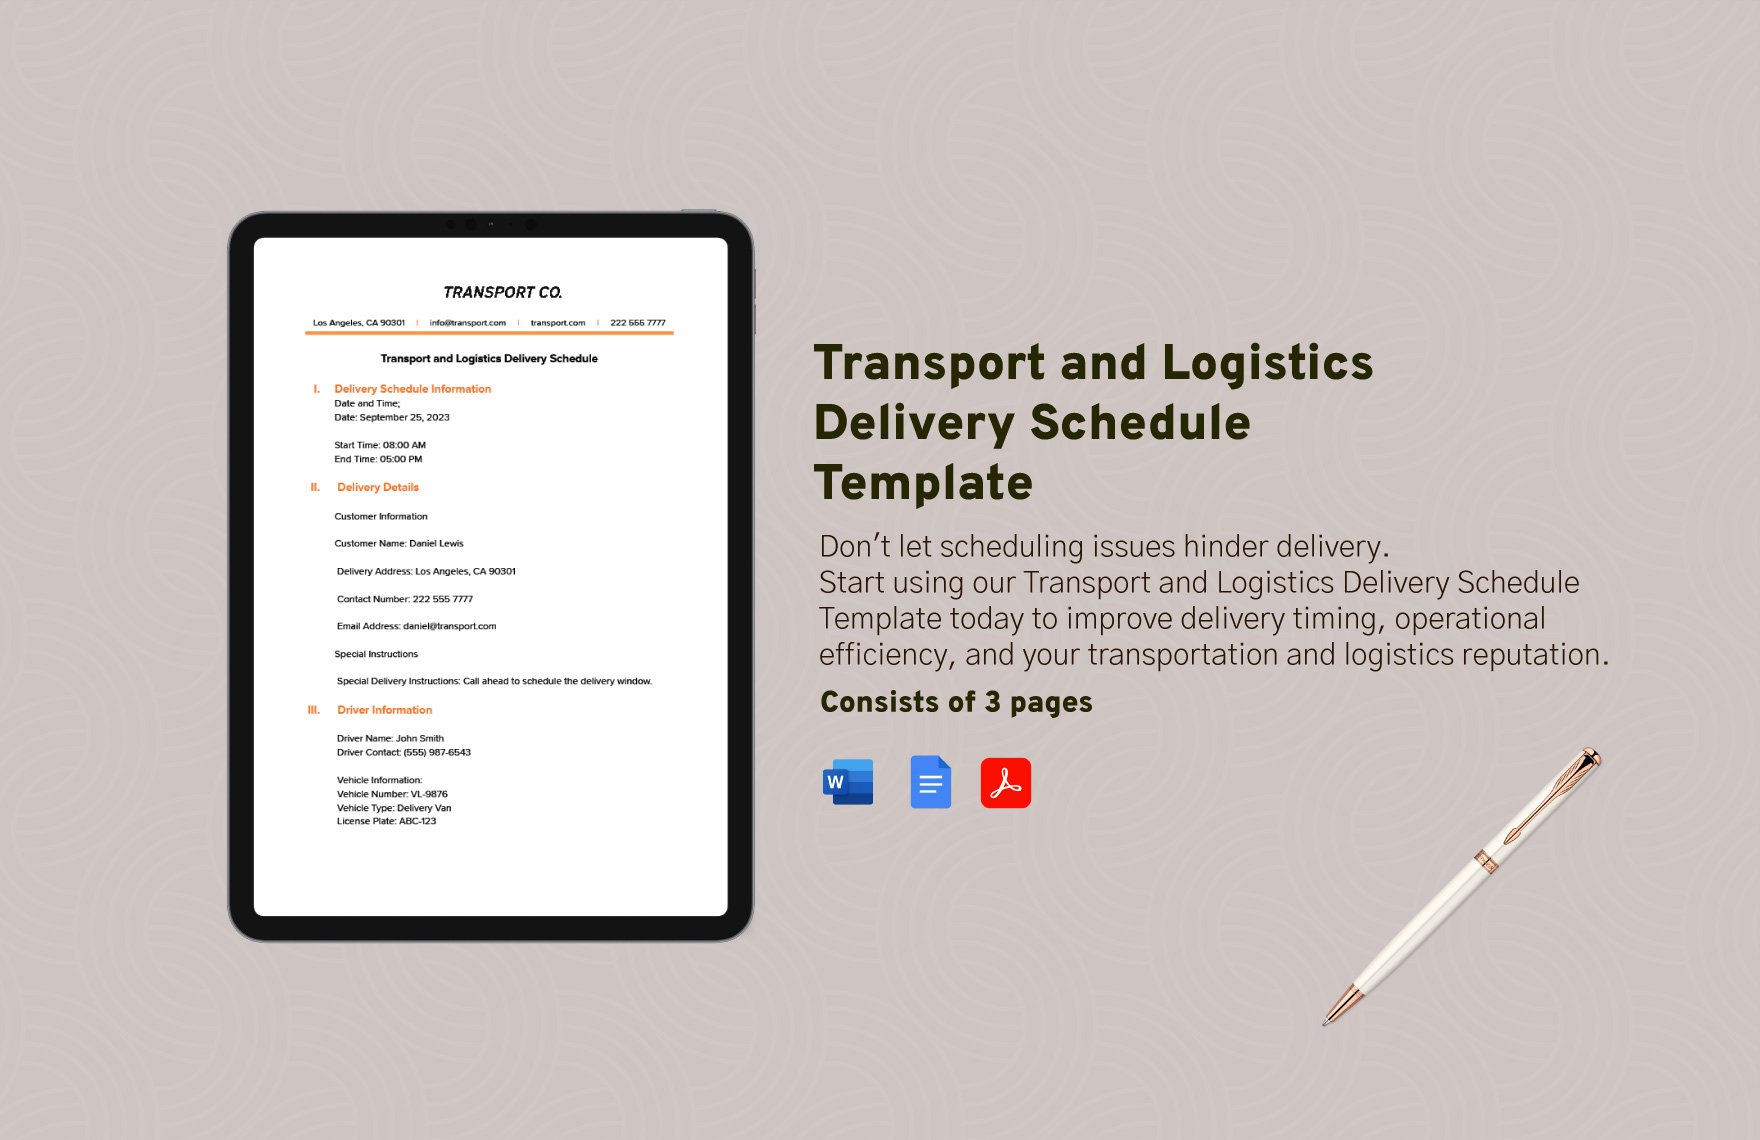 Transport and Logistics Delivery Schedule Template